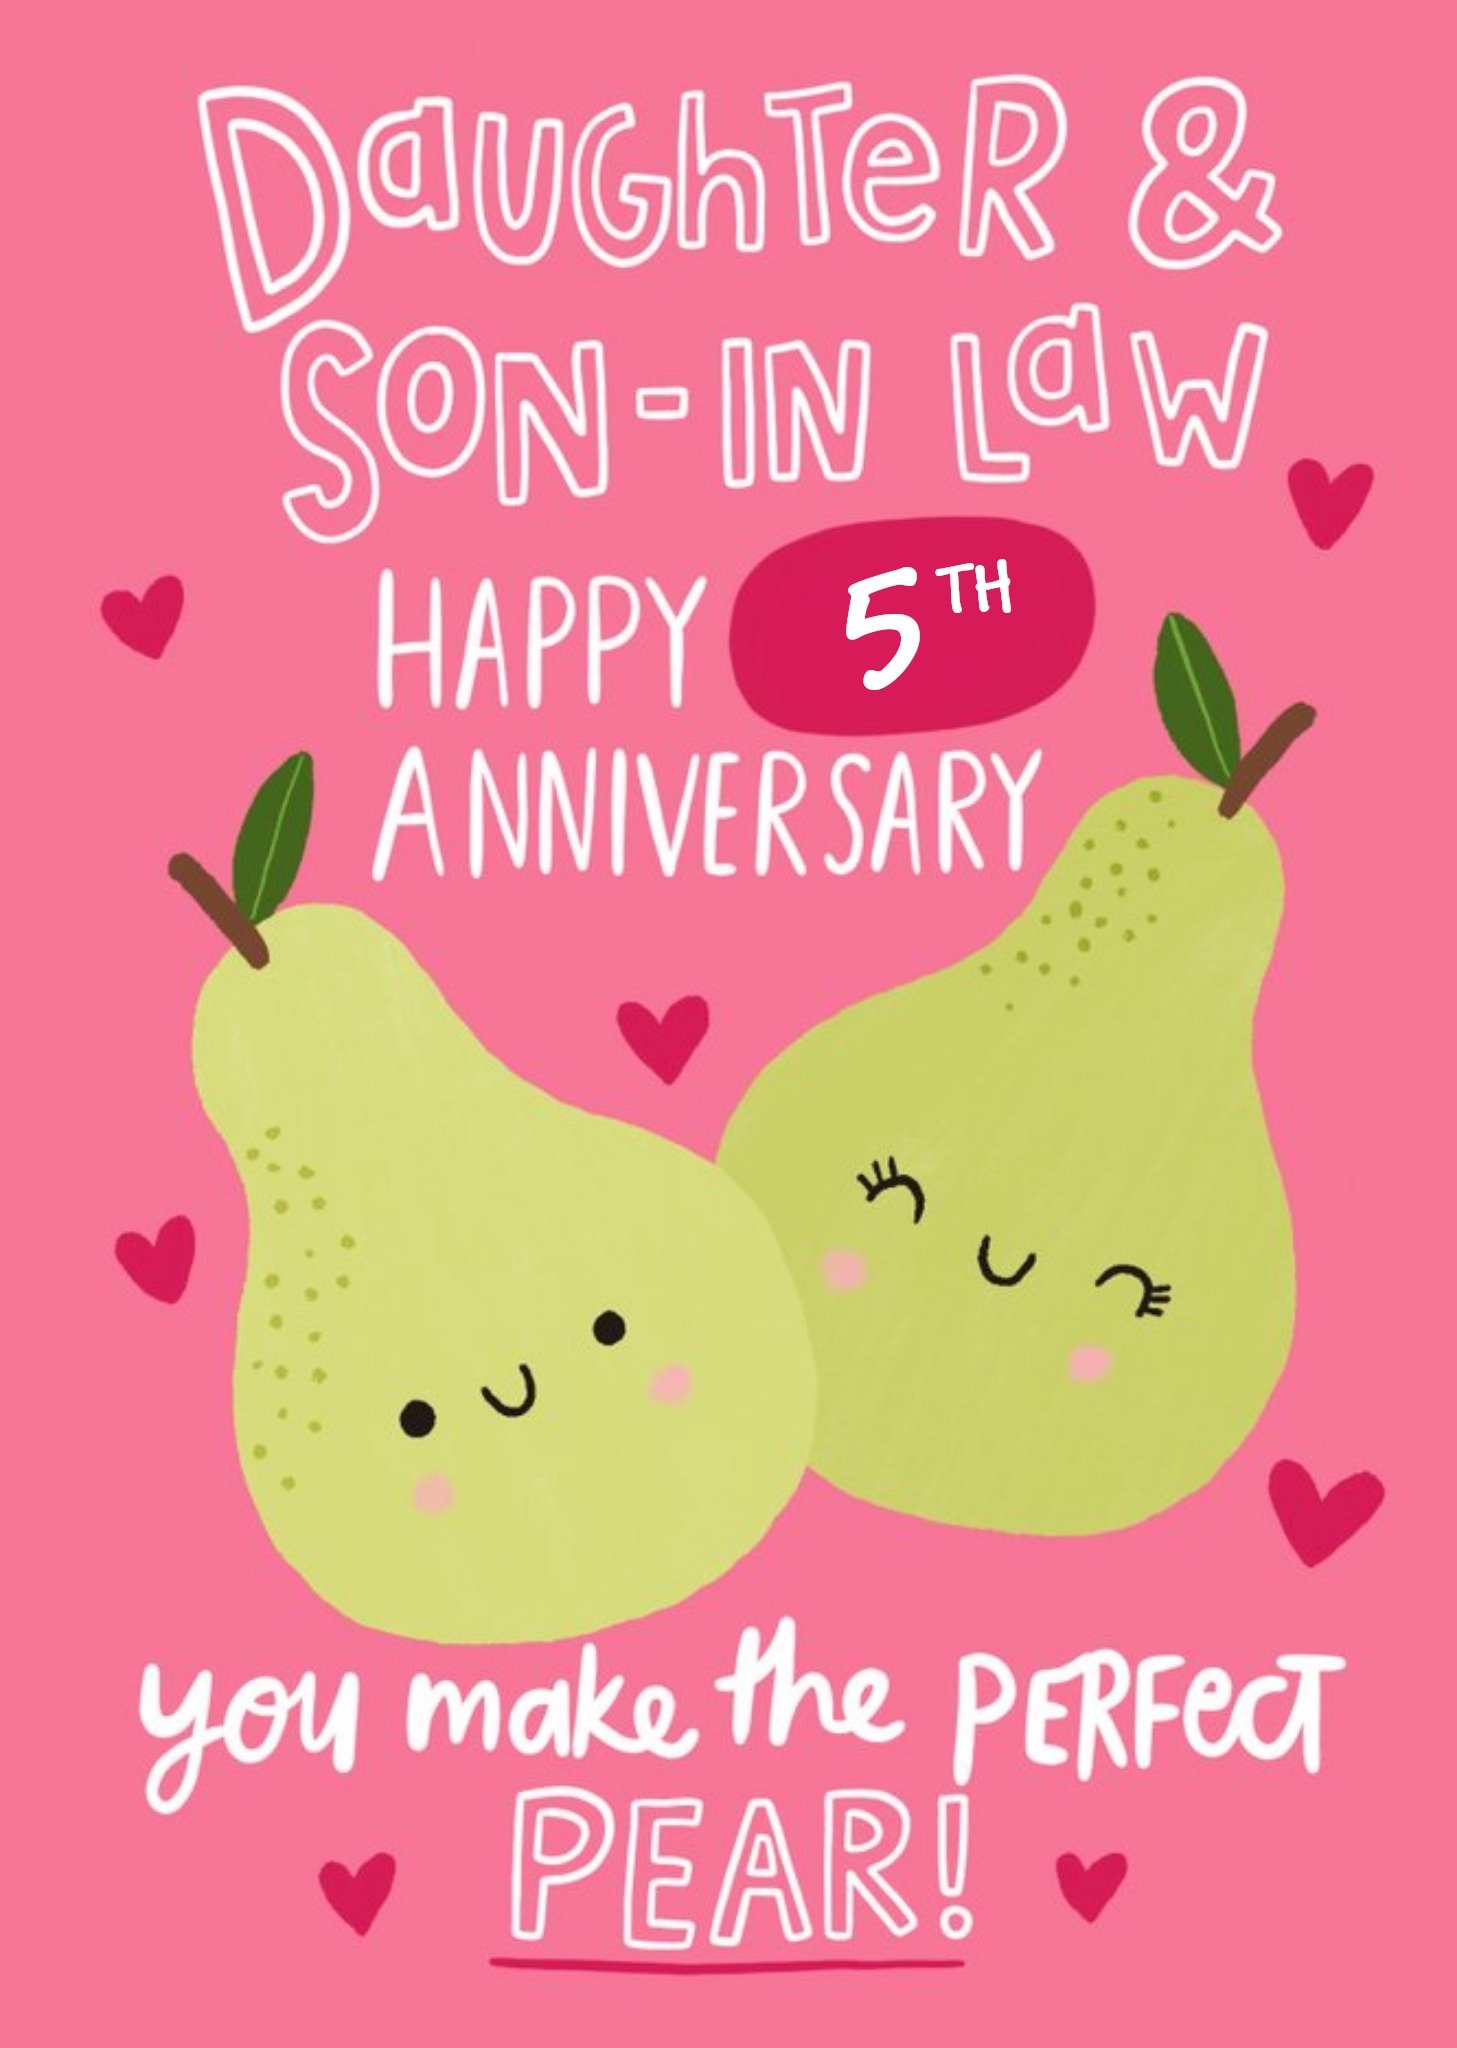 Moonpig Illustration Of Two Pears On A Pink Background Daughter And Son In Law Anniversary Card, Lar